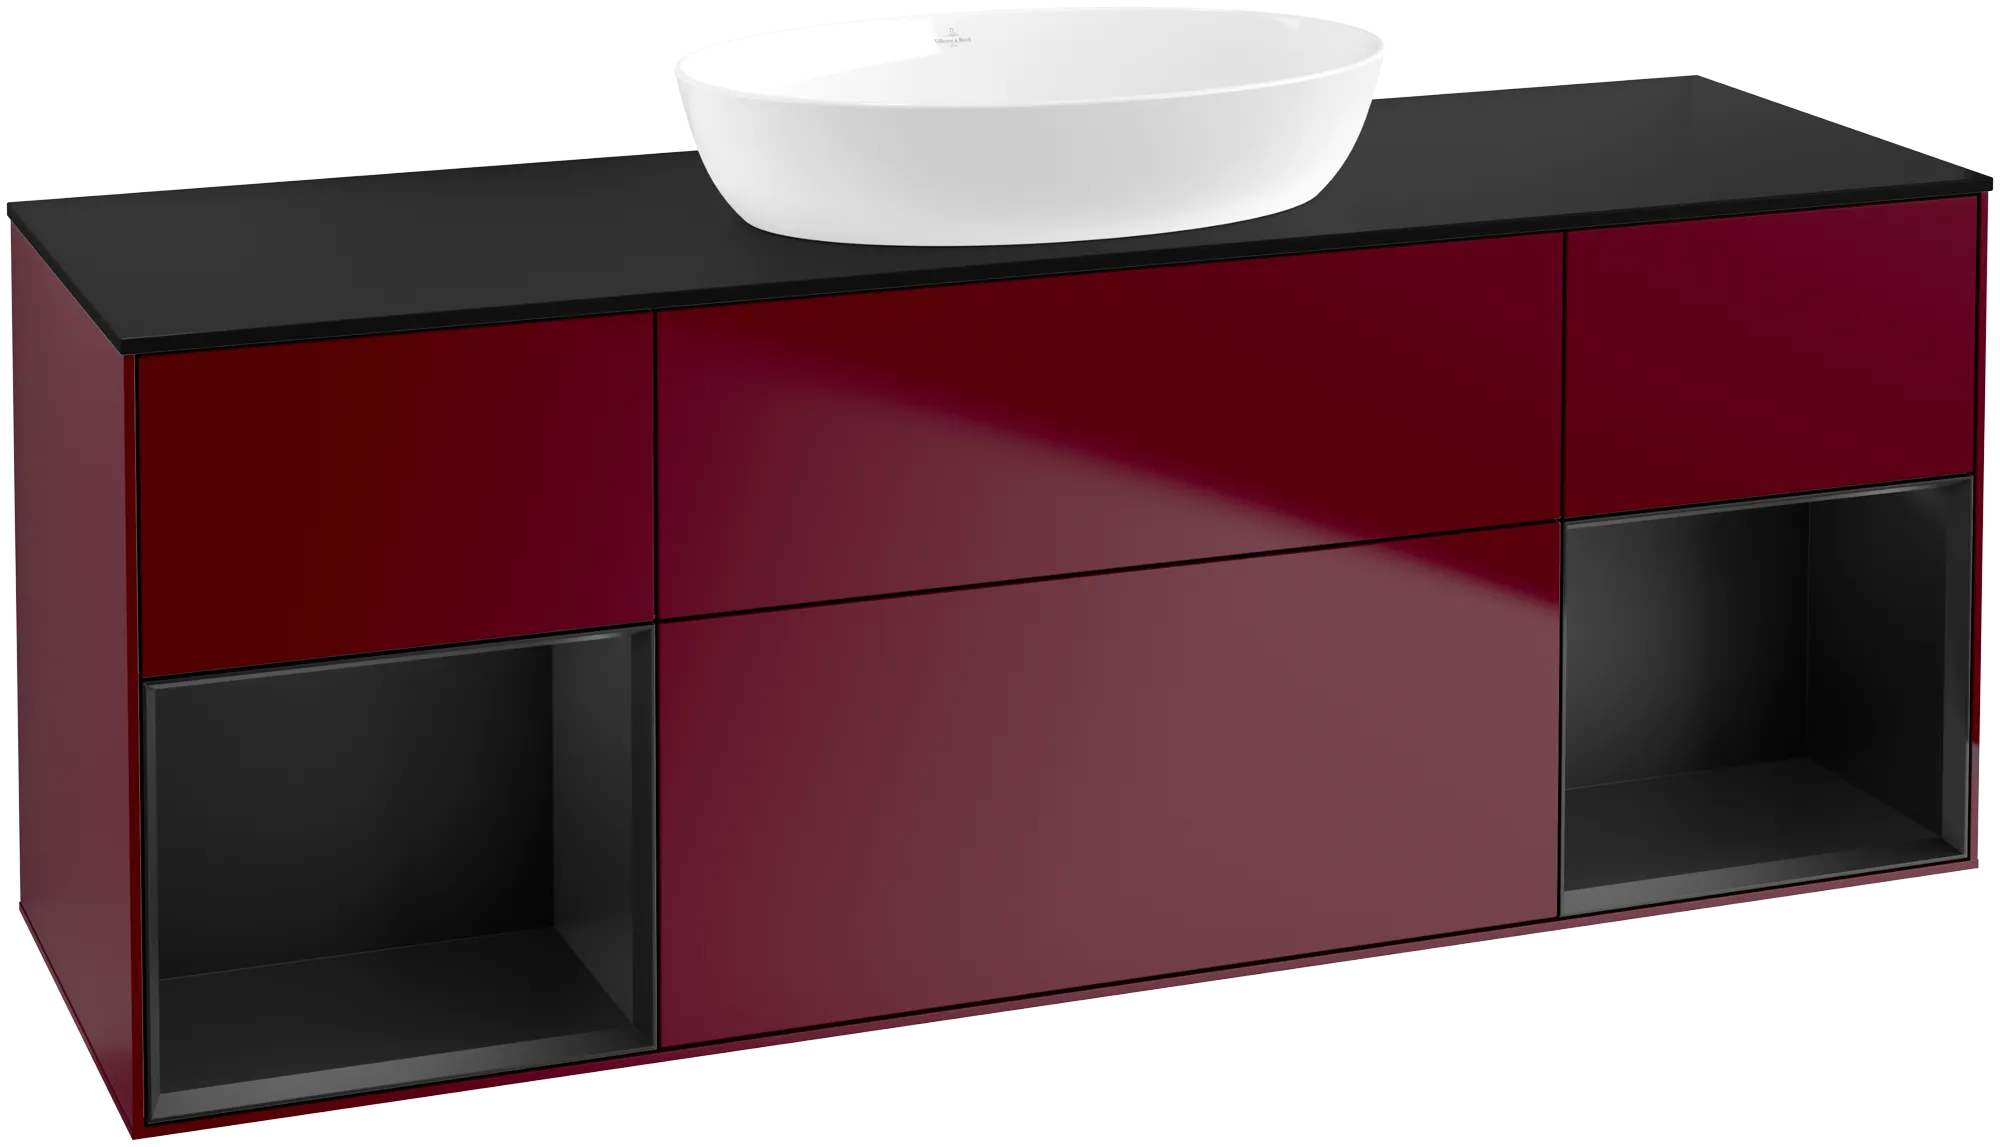 Picture of VILLEROY BOCH Finion Vanity unit, with lighting, 4 pull-out compartments, 1600 x 603 x 501 mm, Peony Matt Lacquer / Black Matt Lacquer / Glass Black Matt #FD02PDHB